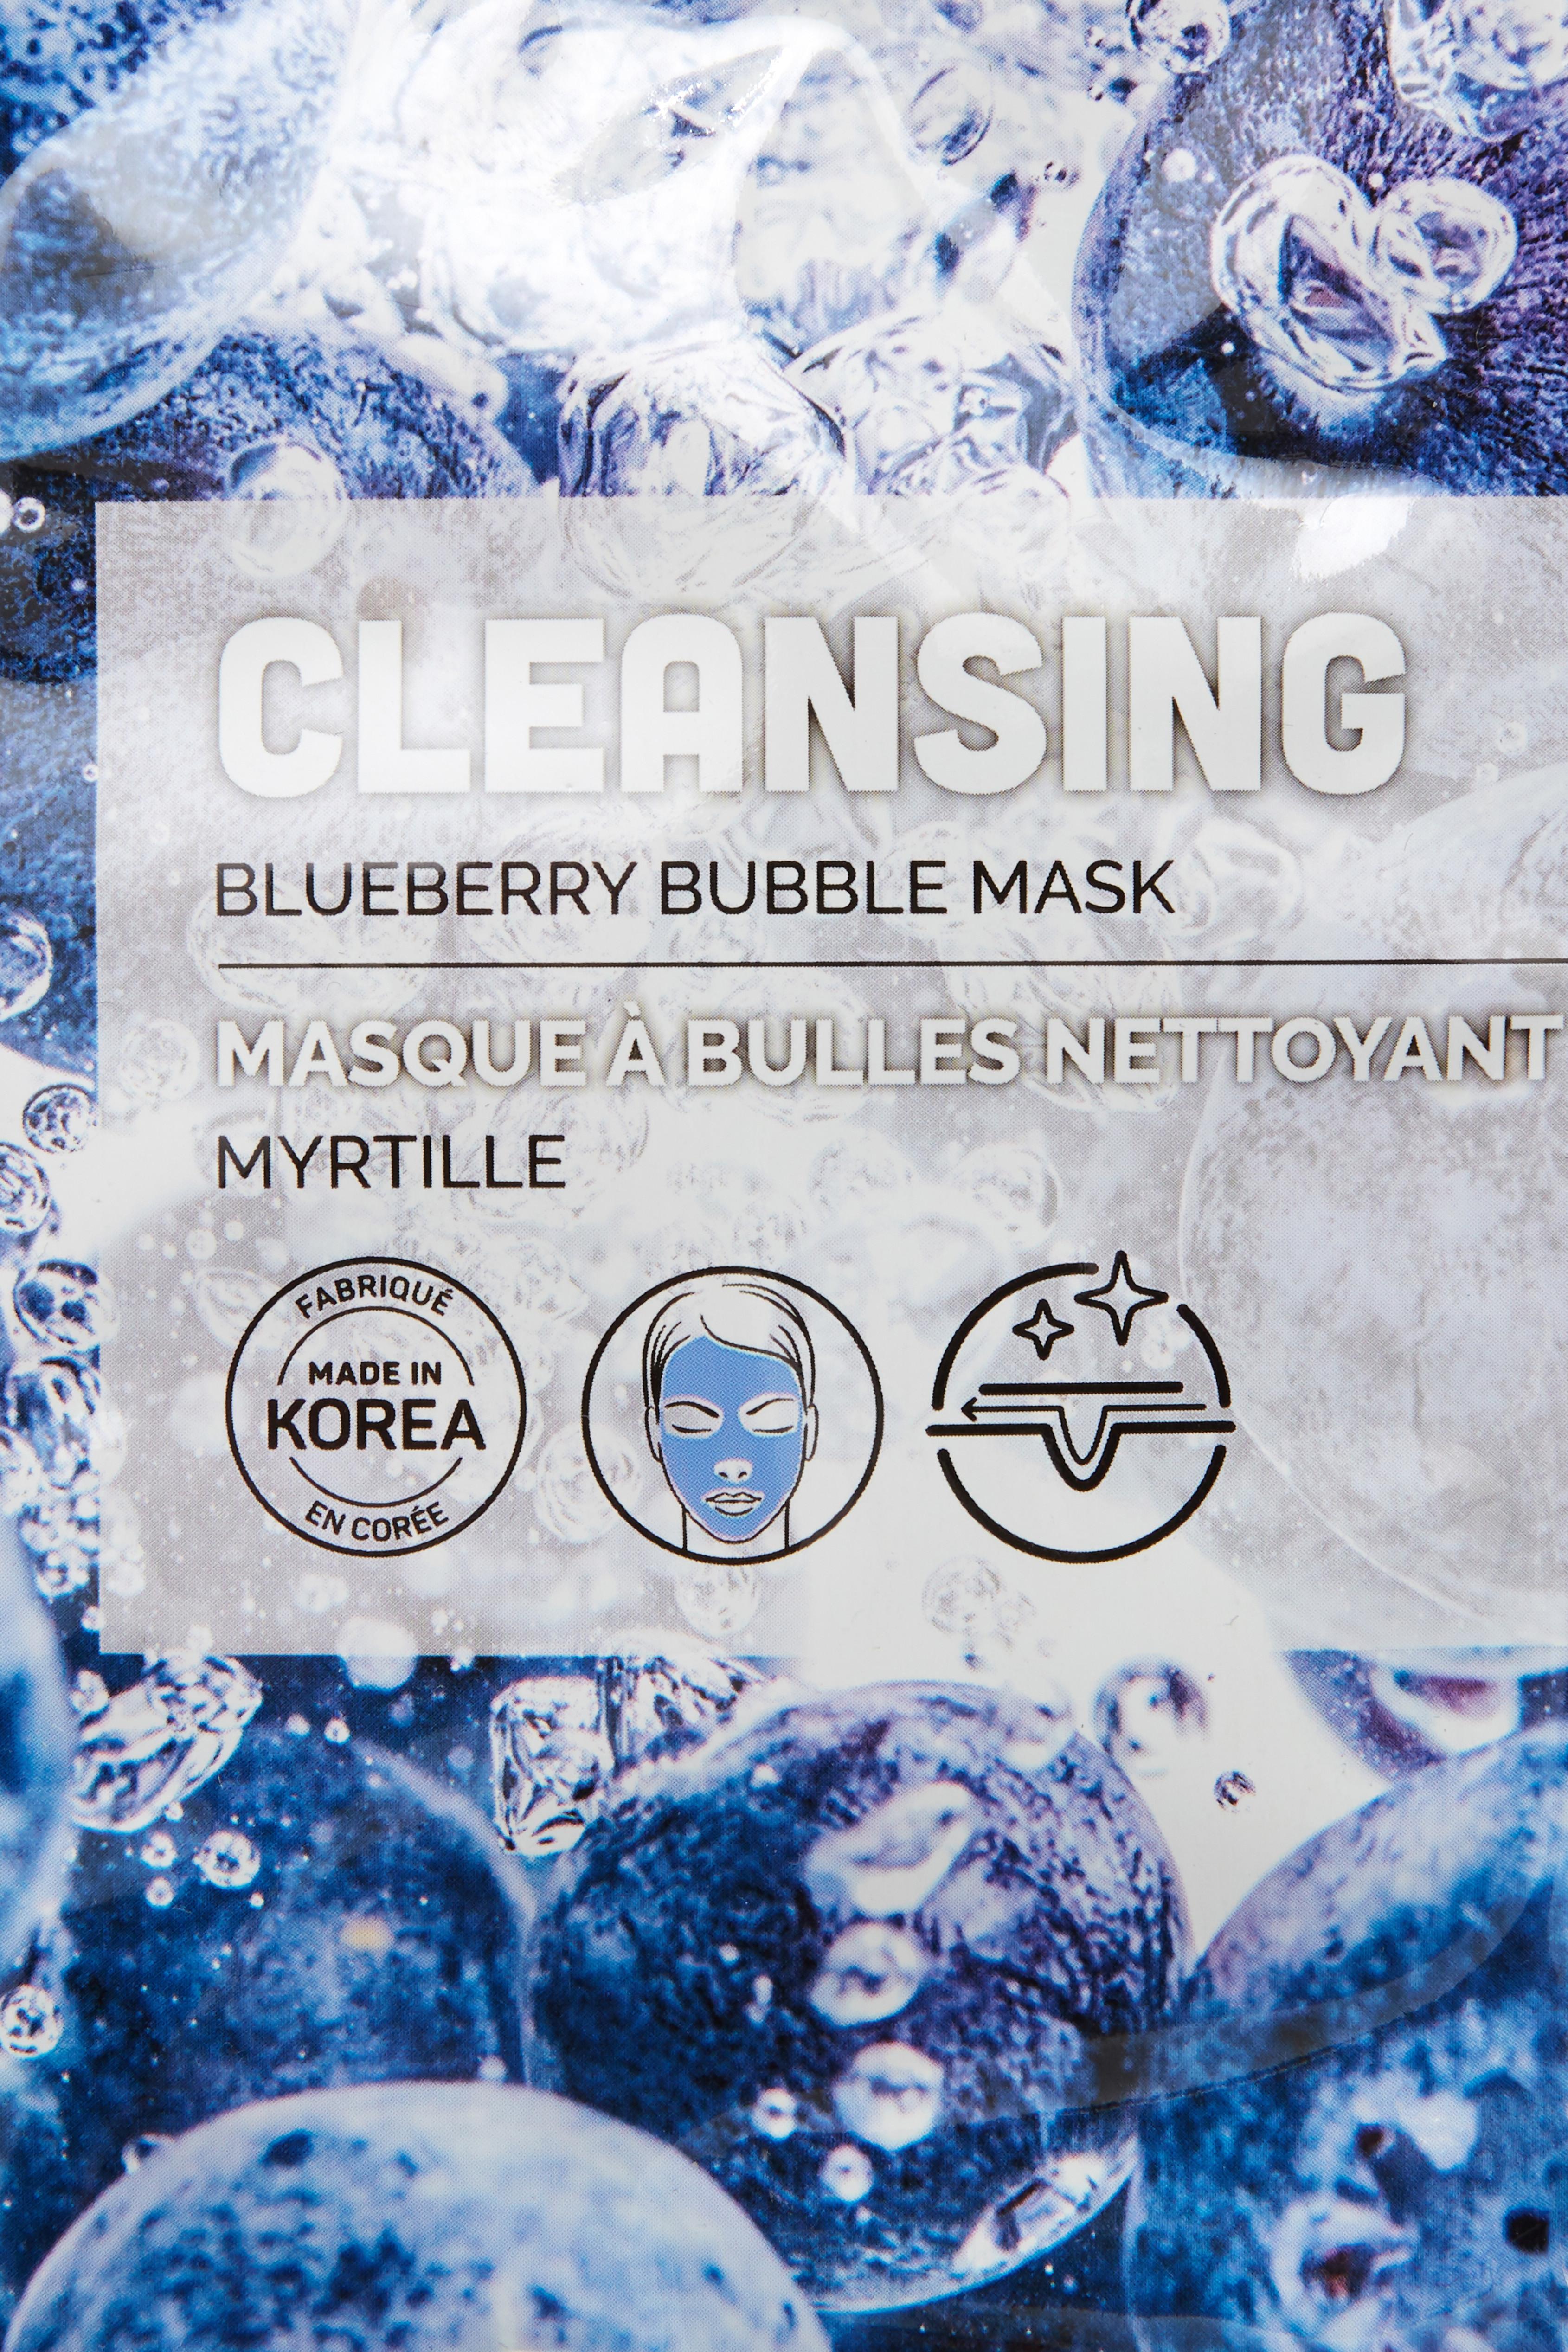 PS Cleansing Blueberry Bubble Face Mask